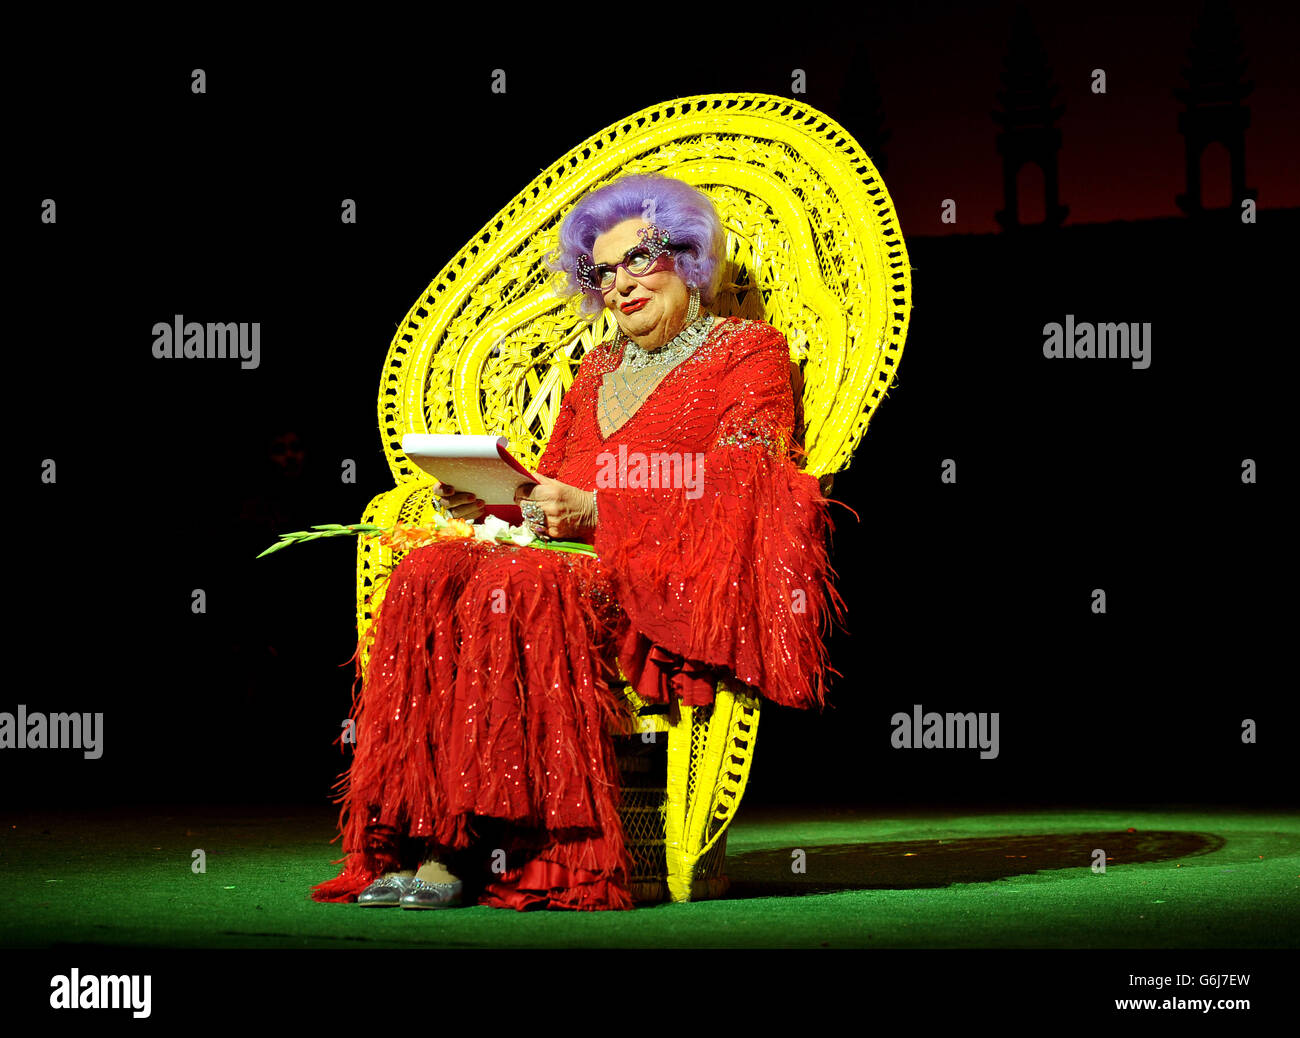 Barry Humphries in character as Dame Edna Everage at the announcement of the Barry Humphries' Farewell Tour at The London Palladium, London. Stock Photo